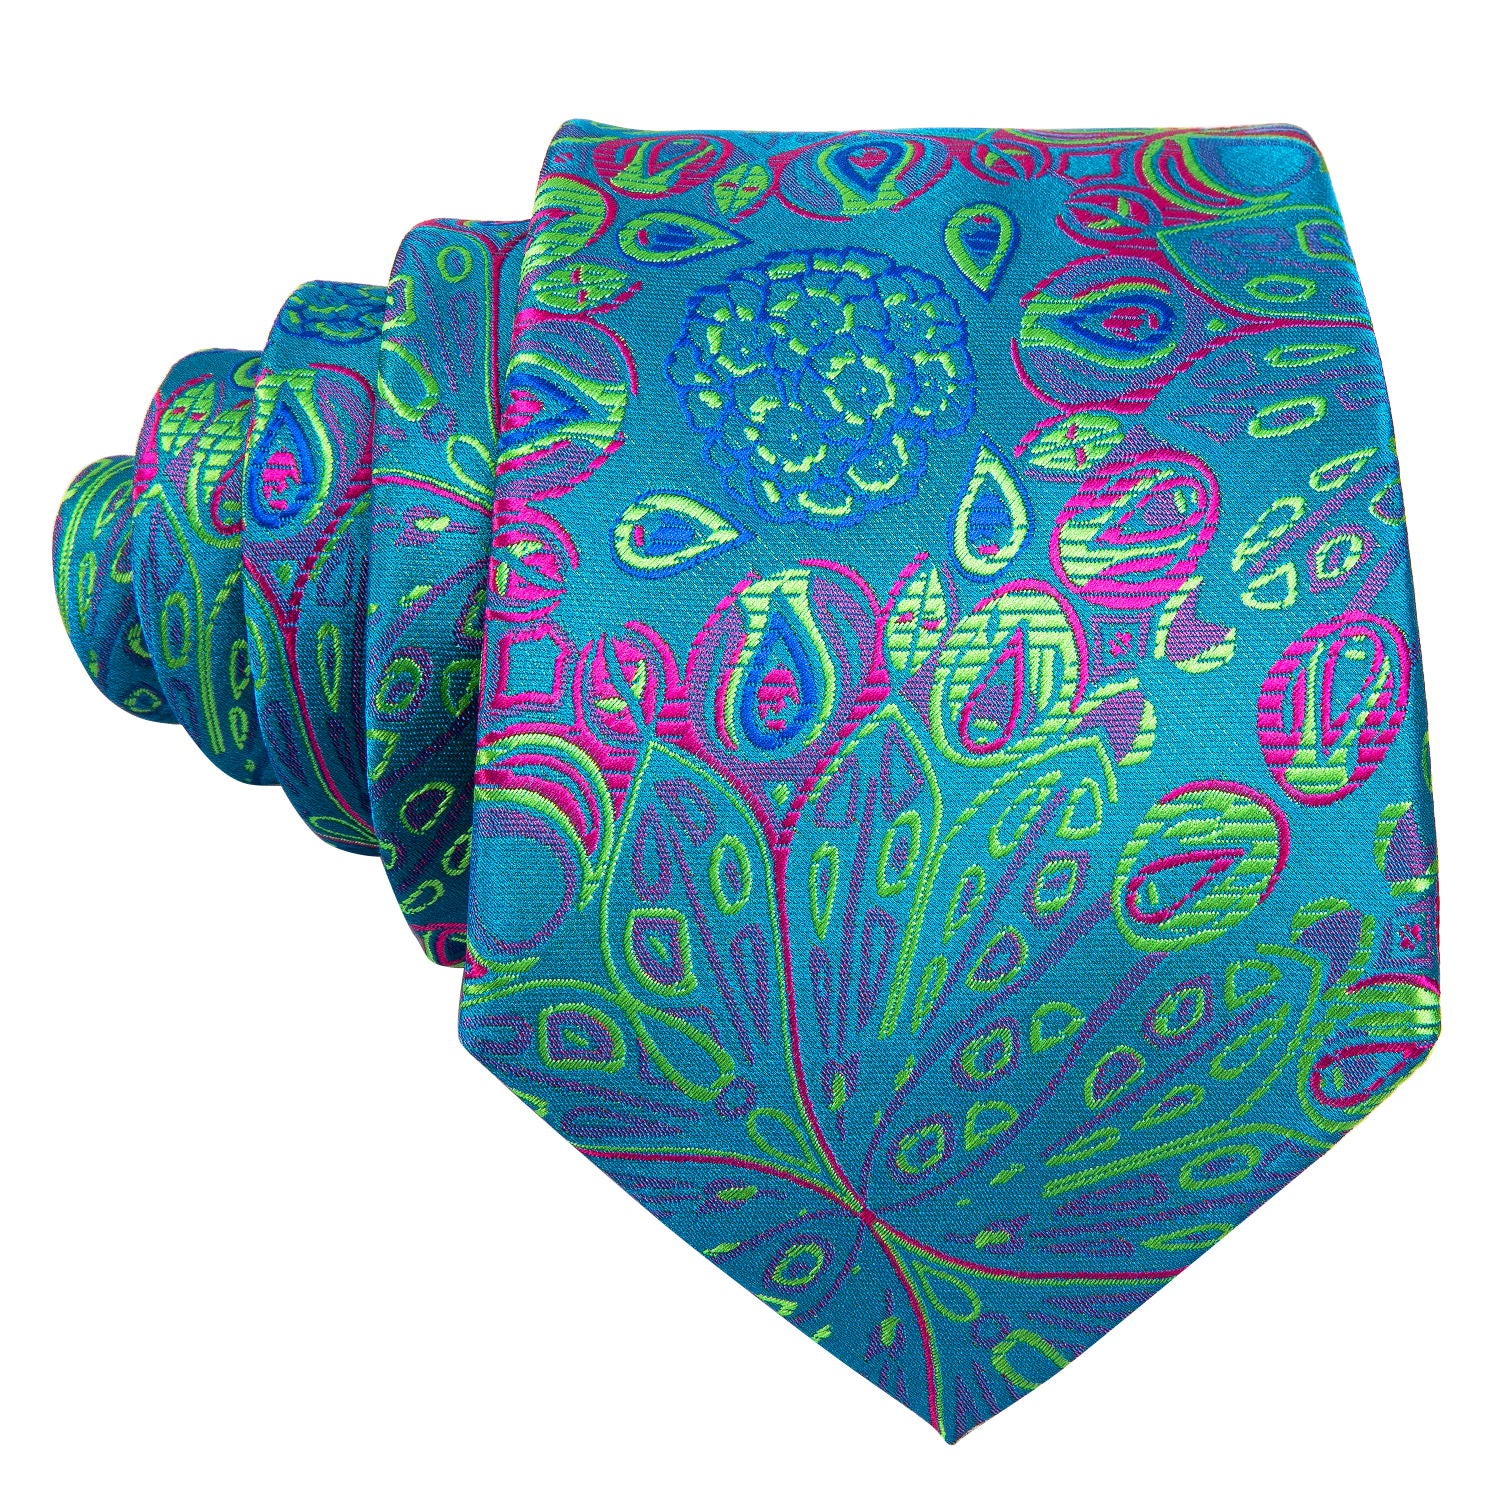 Barry.wang Blue Tie Green Floral Tie Pocket Square Cufflinks Set